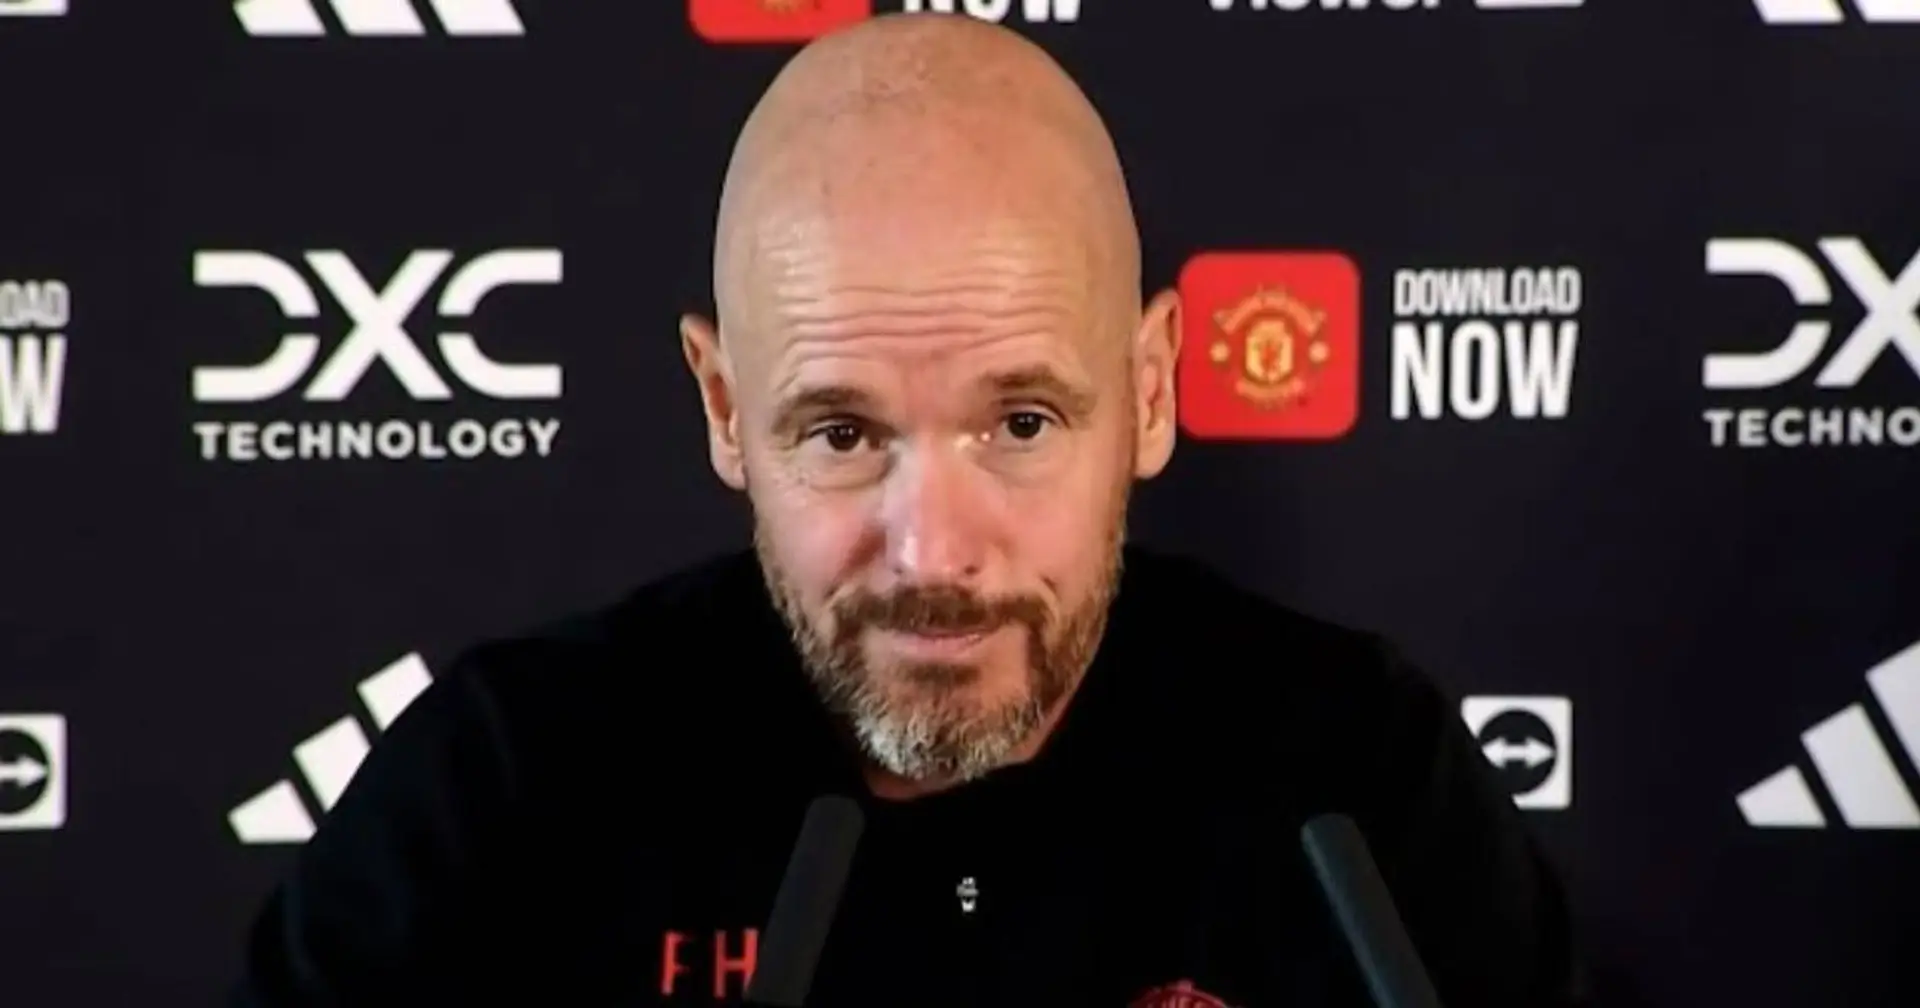 Ten Hag: Man United winning FA Cup would be 'over-achievement'